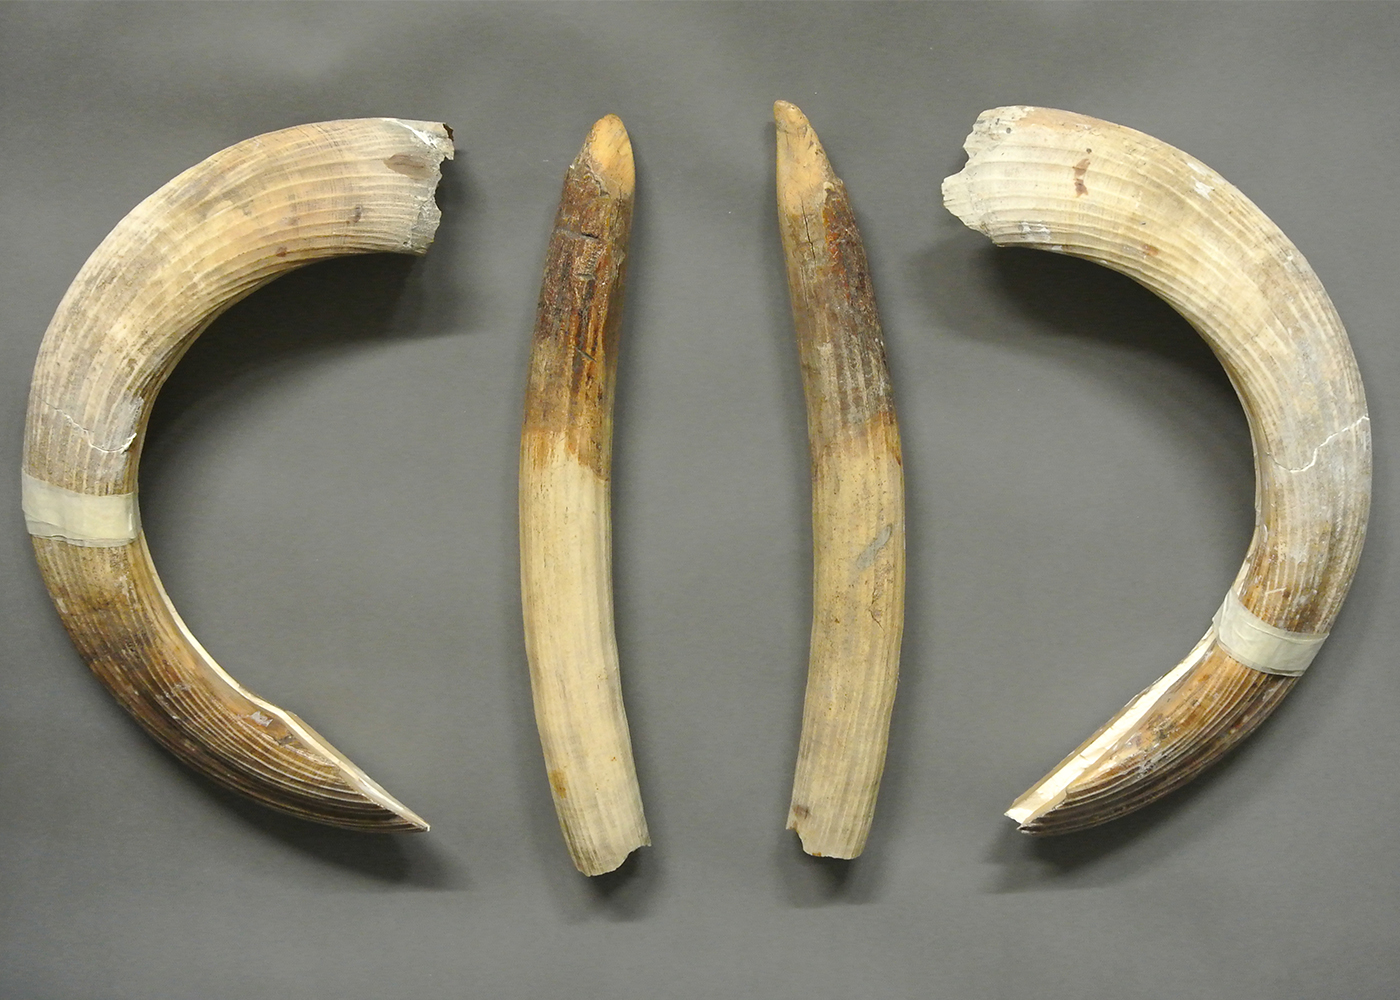 A LATE 19TH/EARLY 20TH CENTURY SET OF HIPPOPOTAMUS TUSKS. (the longest curved tusk measuring